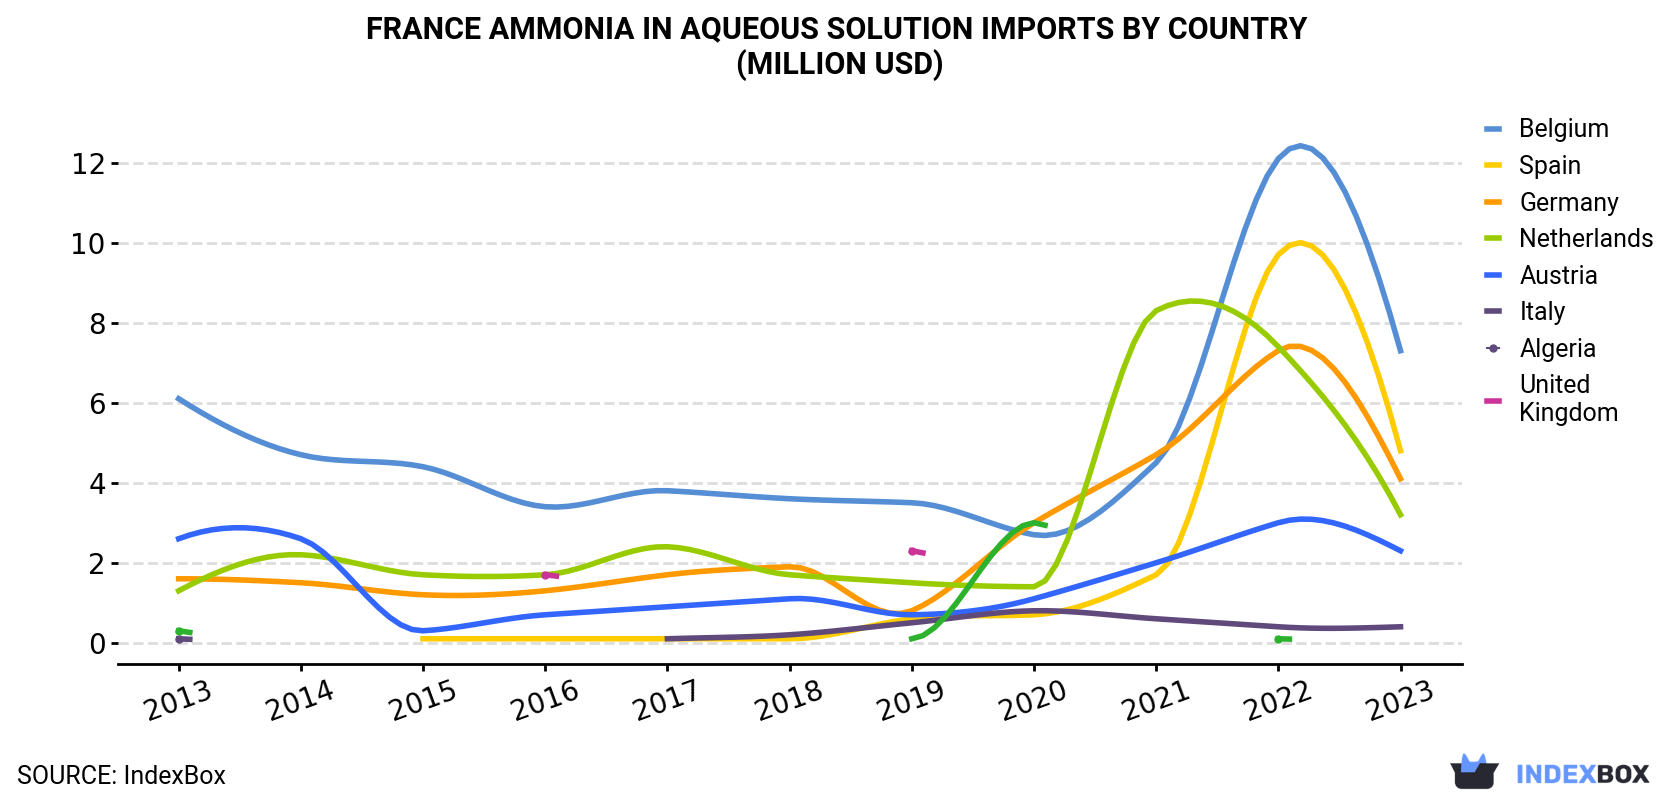 France Ammonia In Aqueous Solution Imports By Country (Million USD)